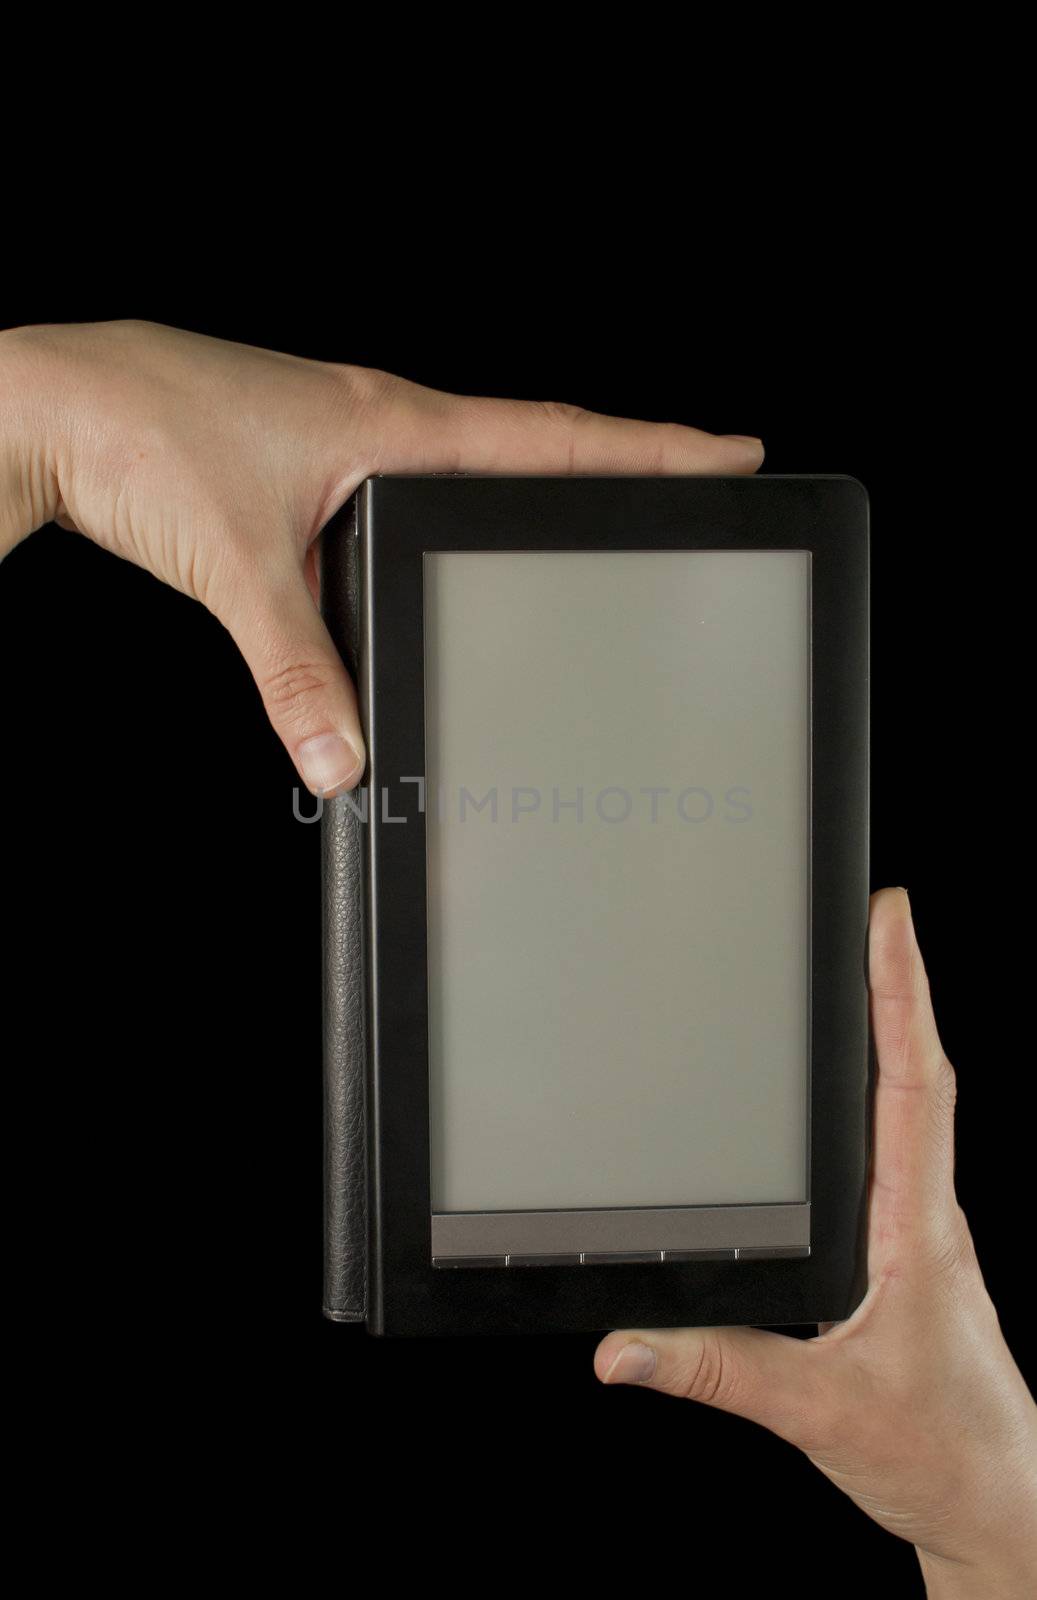 Hand holding an electronic book reader on the black background